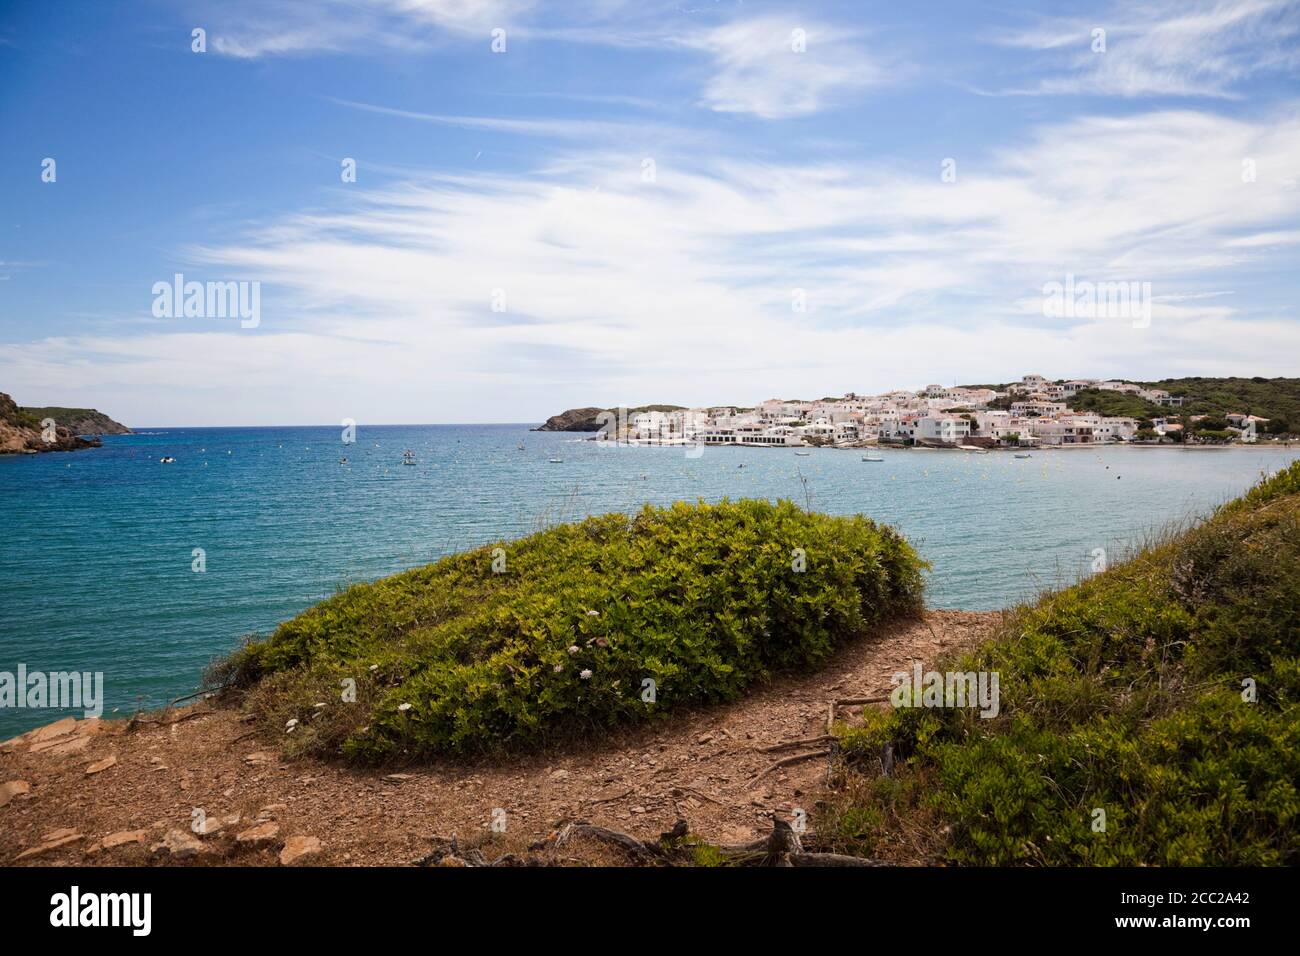 Spain, Menorca, Es Grau bay with fishing village in background Stock Photo